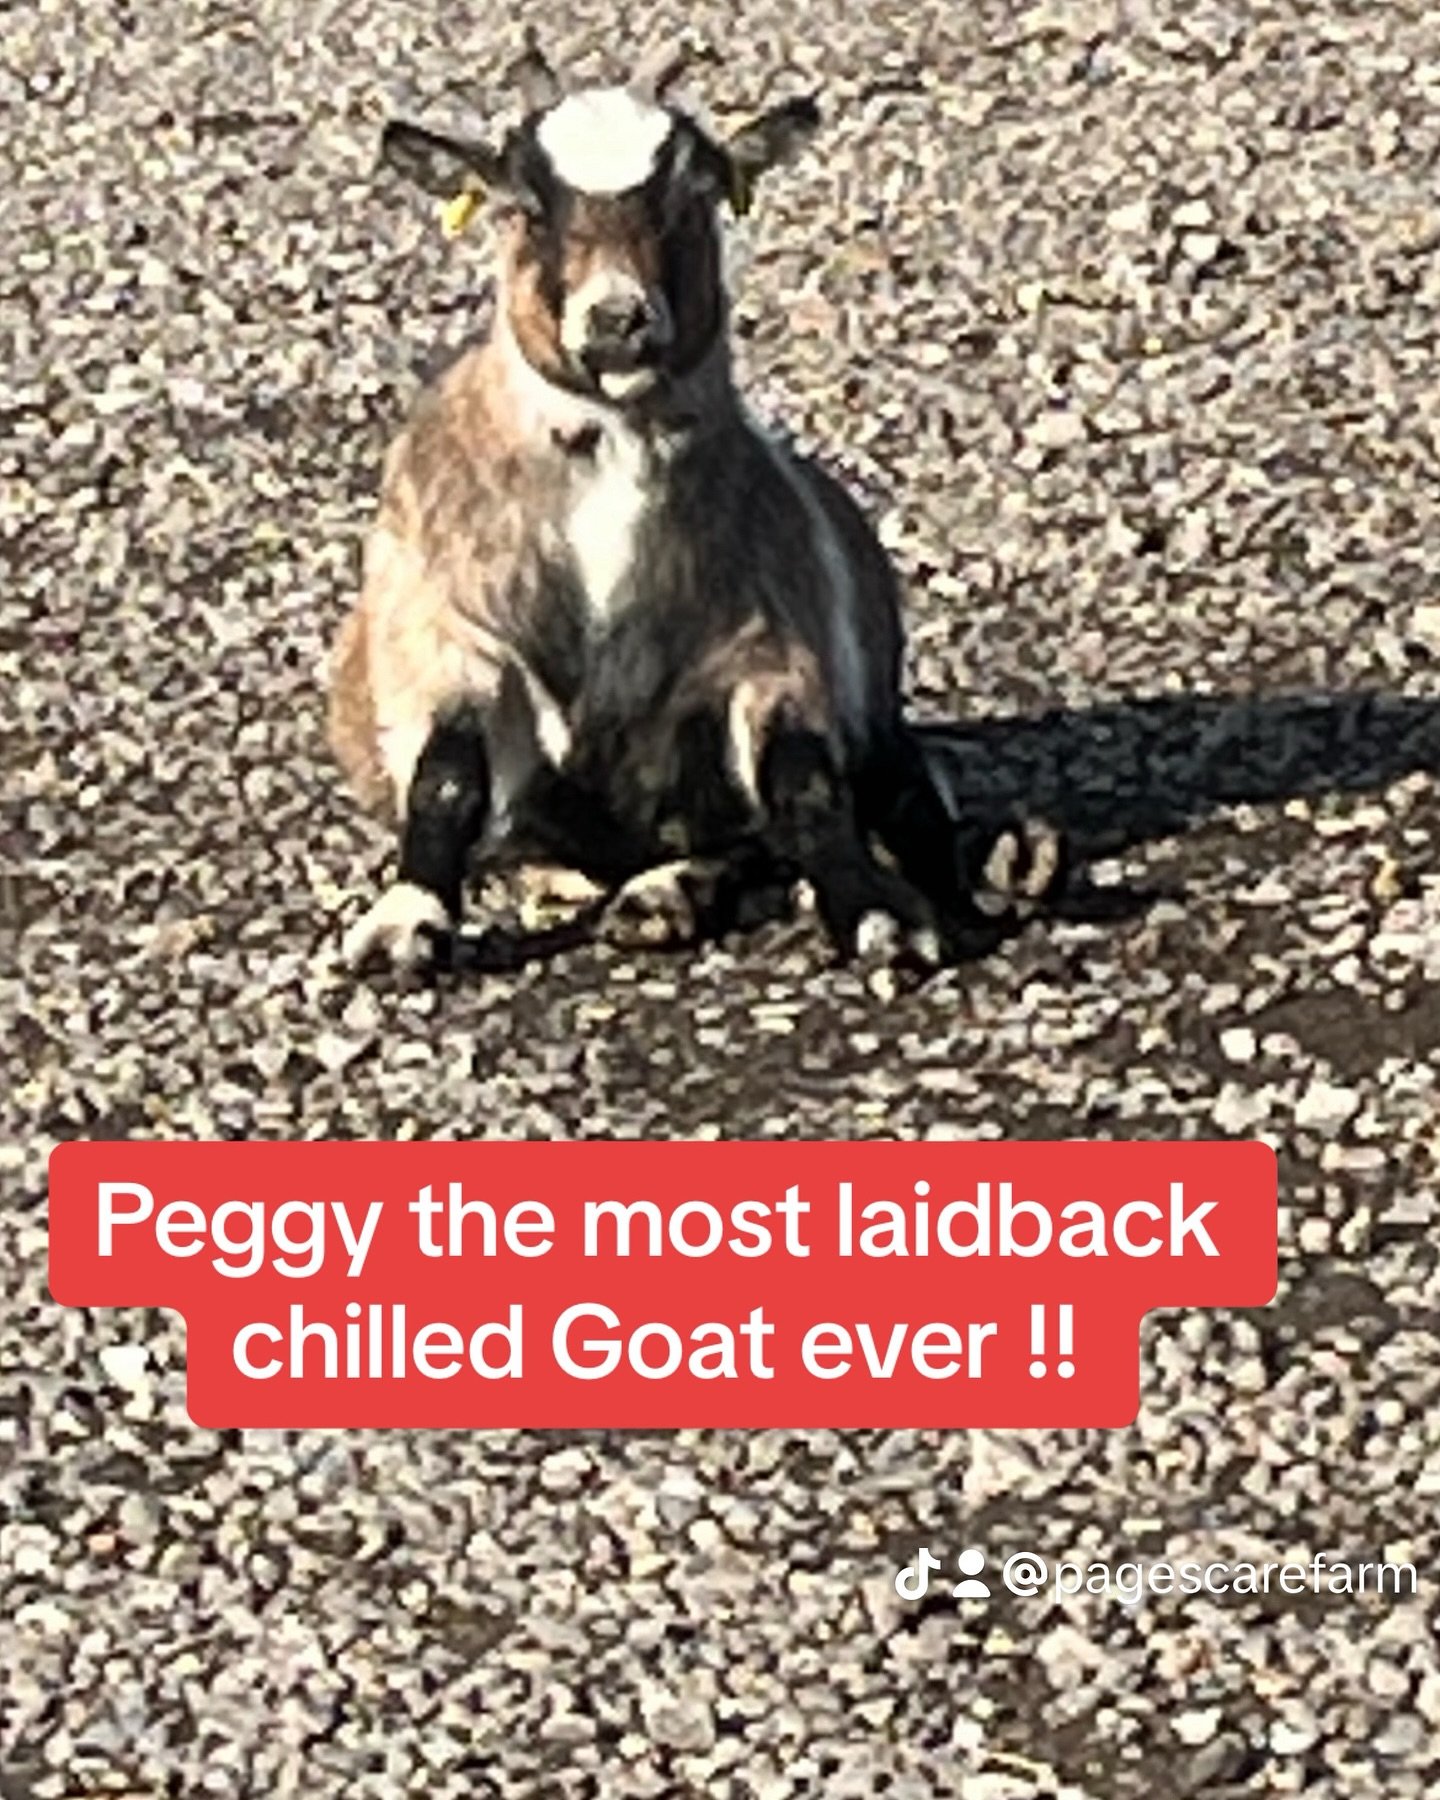 Peggy the most chilled laid back goat ever ! #chill #happy #goat #lazy #for #you #your #mentalhealth #animal #animaltherapy #pagescarefarm